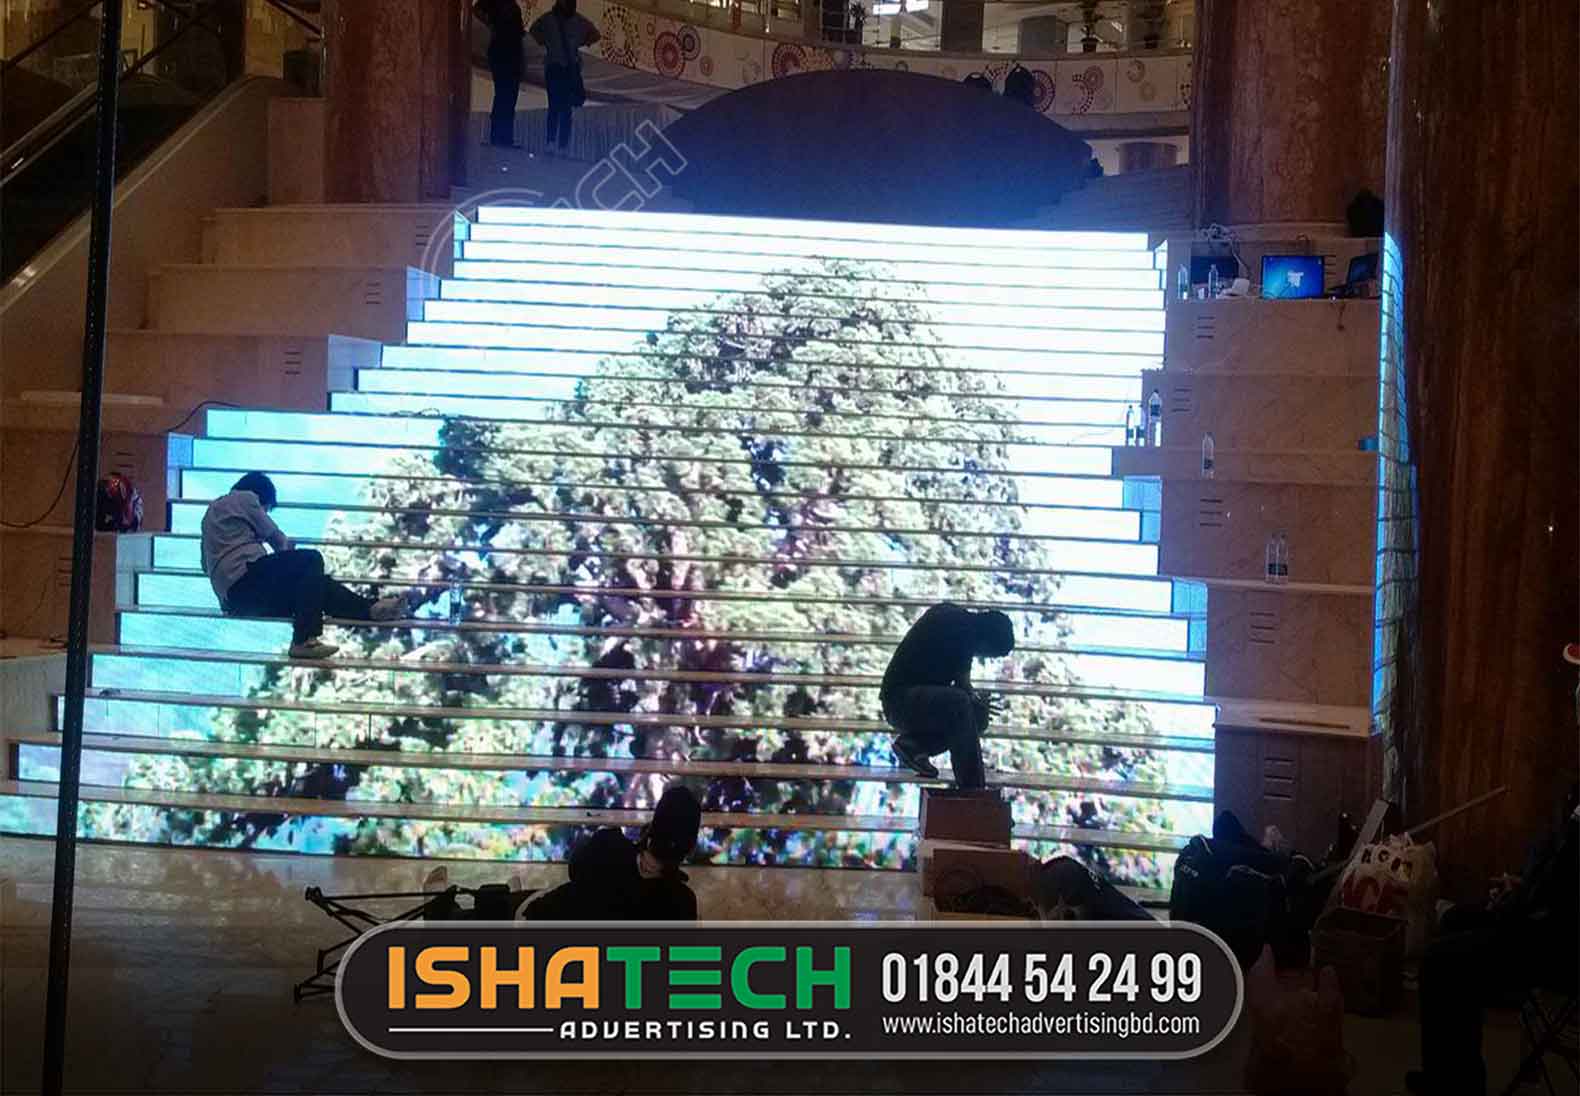 Curved LED display on Stair Screen for event and banijjomela interior and advertisement bd. led stair maker and manufacturer agency in Dhaka Bangladesh